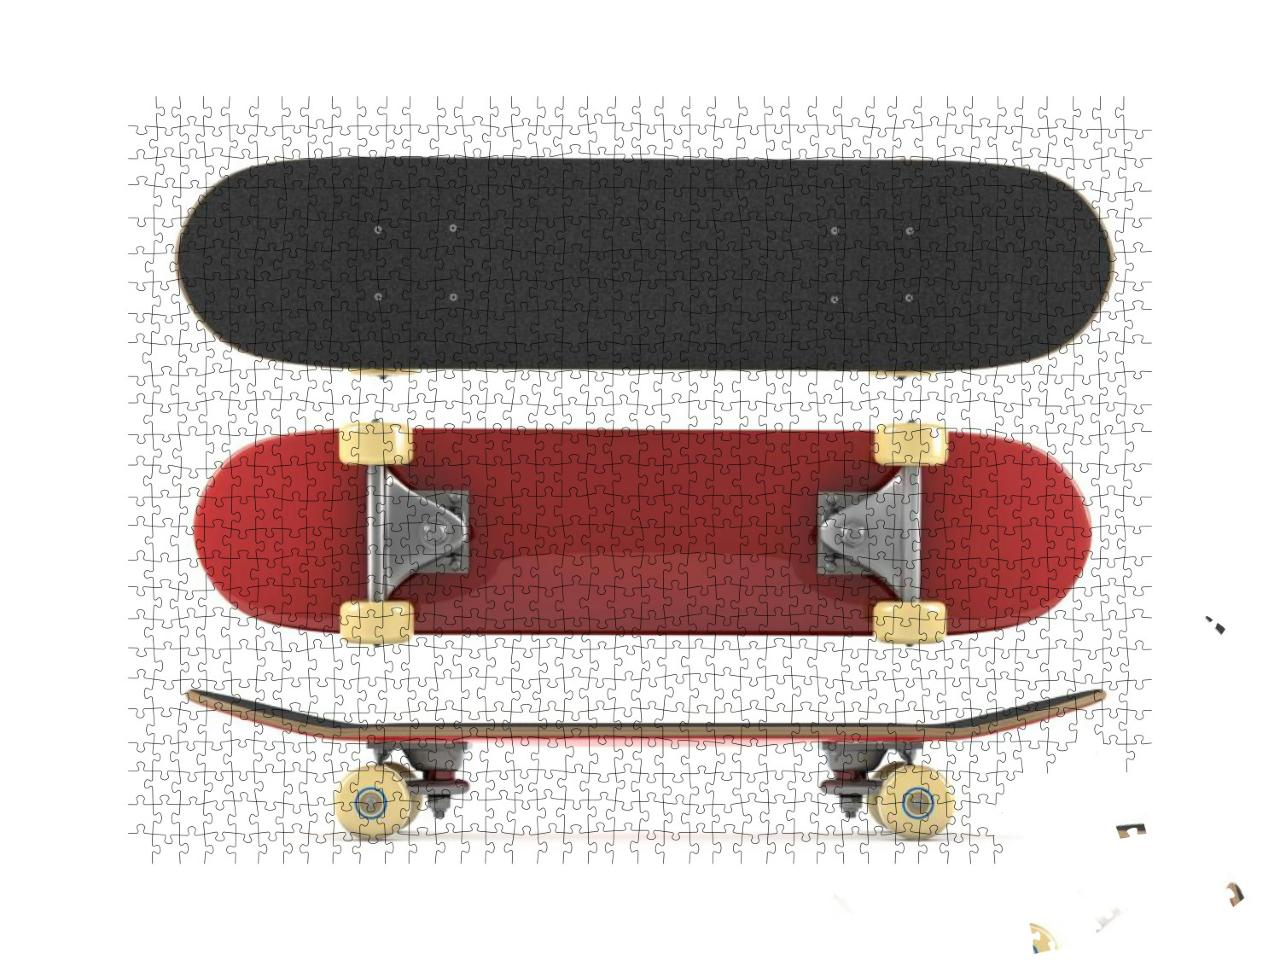 Skateboard Isolated on White Background... Jigsaw Puzzle with 1000 pieces